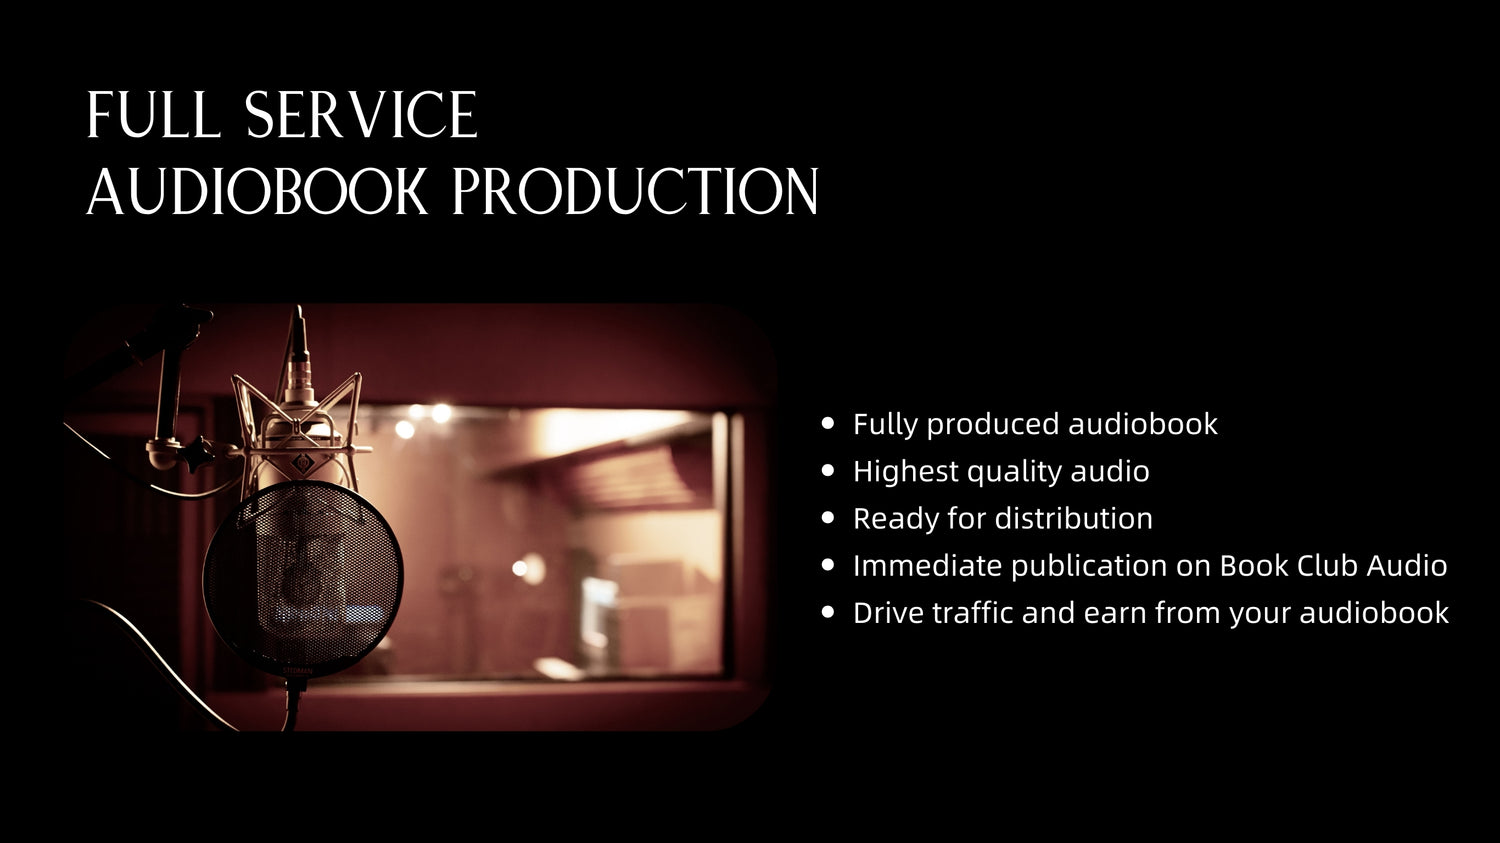 Book Club Audio audiobook narration and publication 